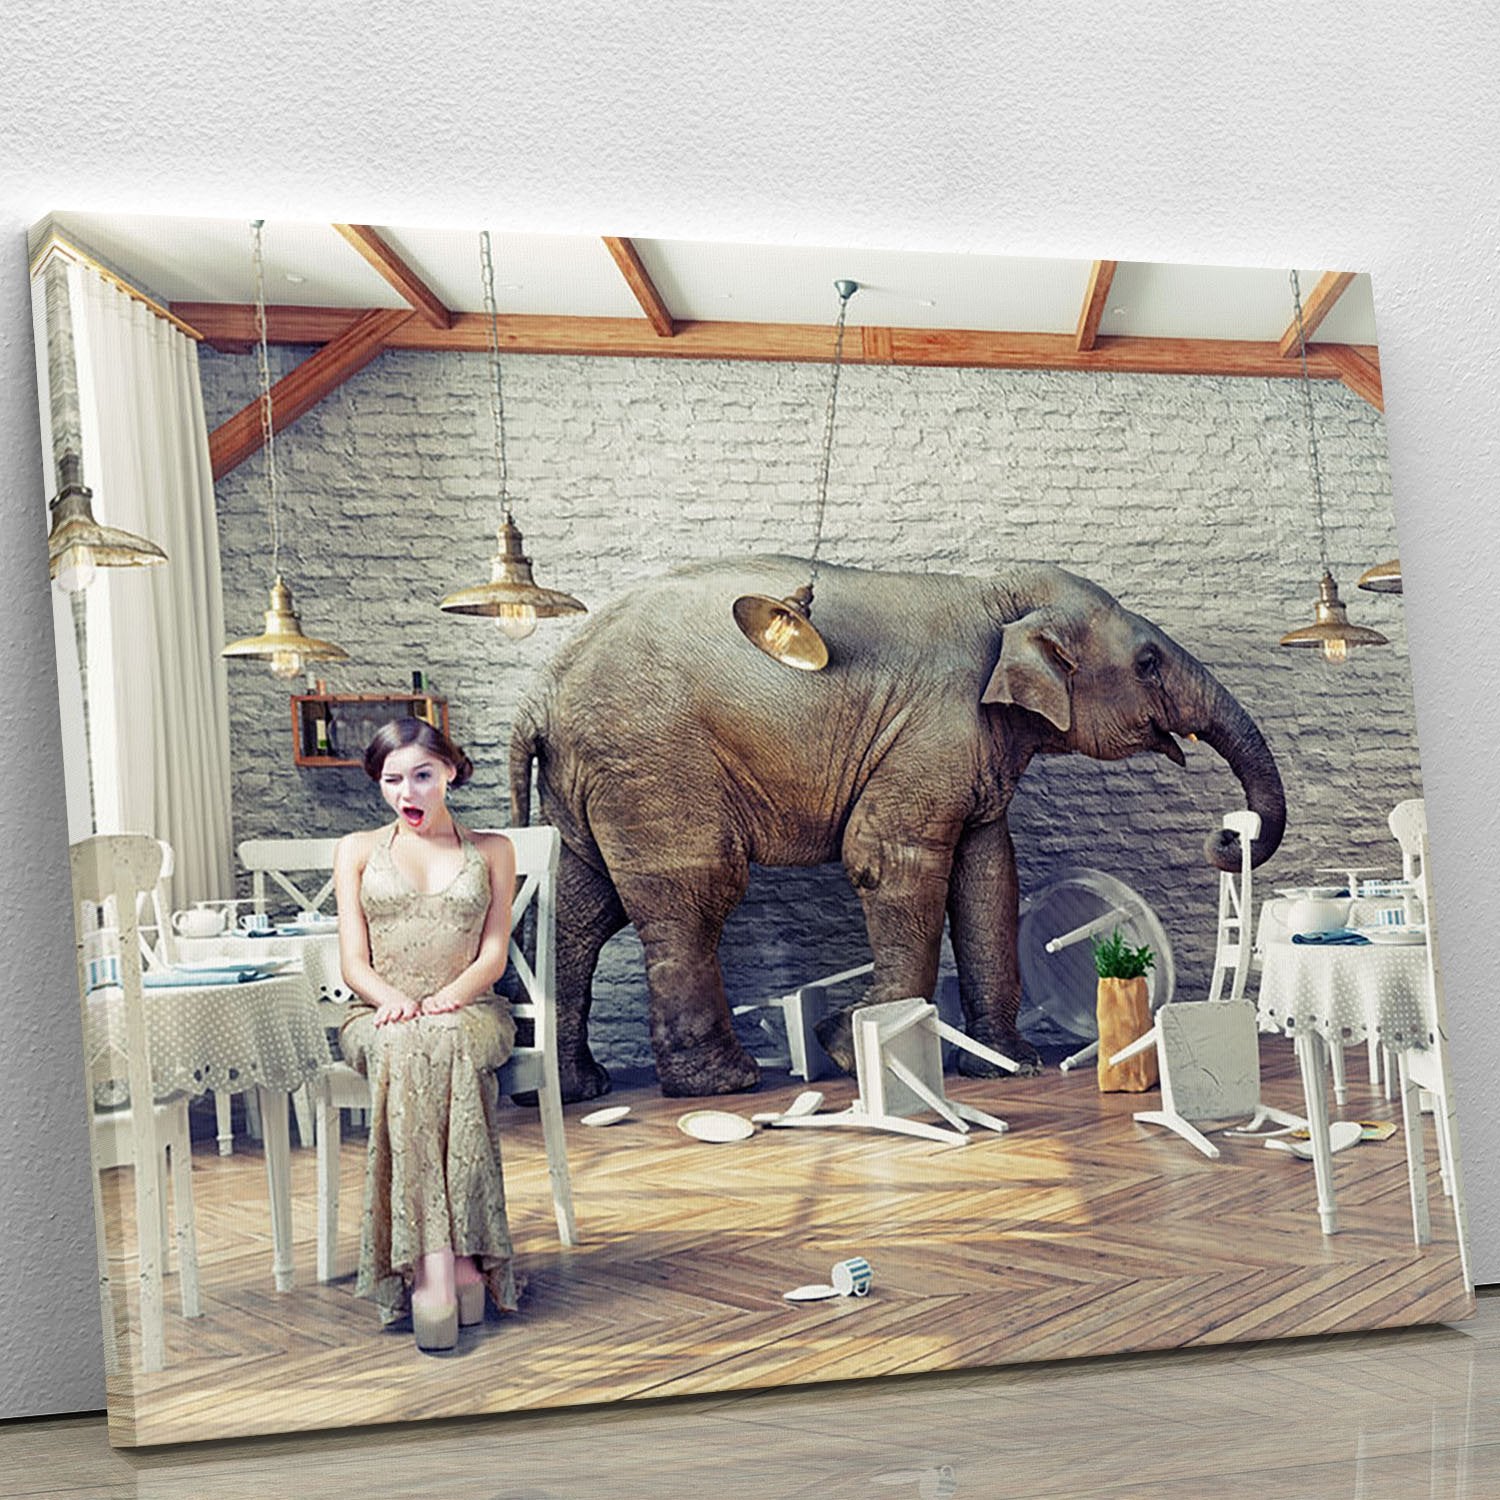 The elephant calm in a restaurant interior. photo combination concept Canvas Print or Poster